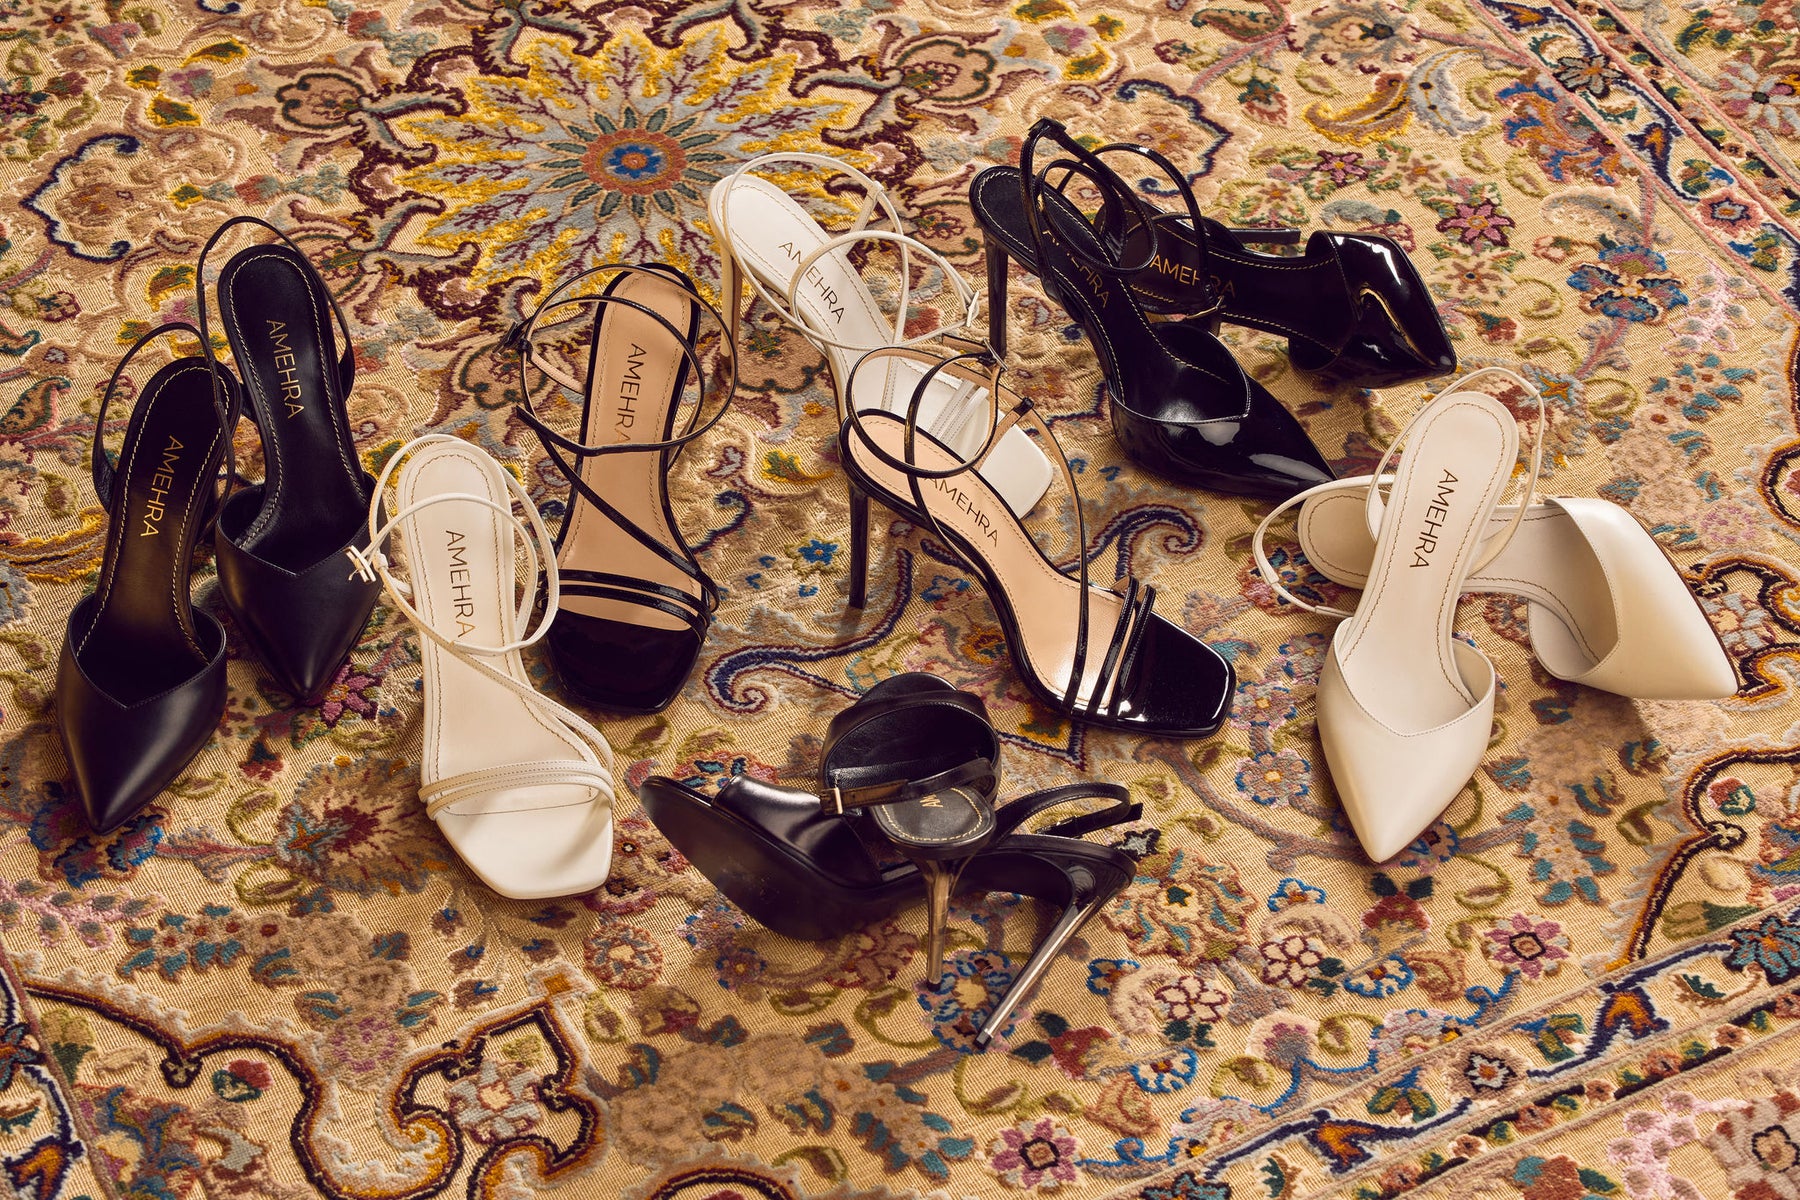 Luxury sustainable women's black and white shoes laid out together on the Persian rug